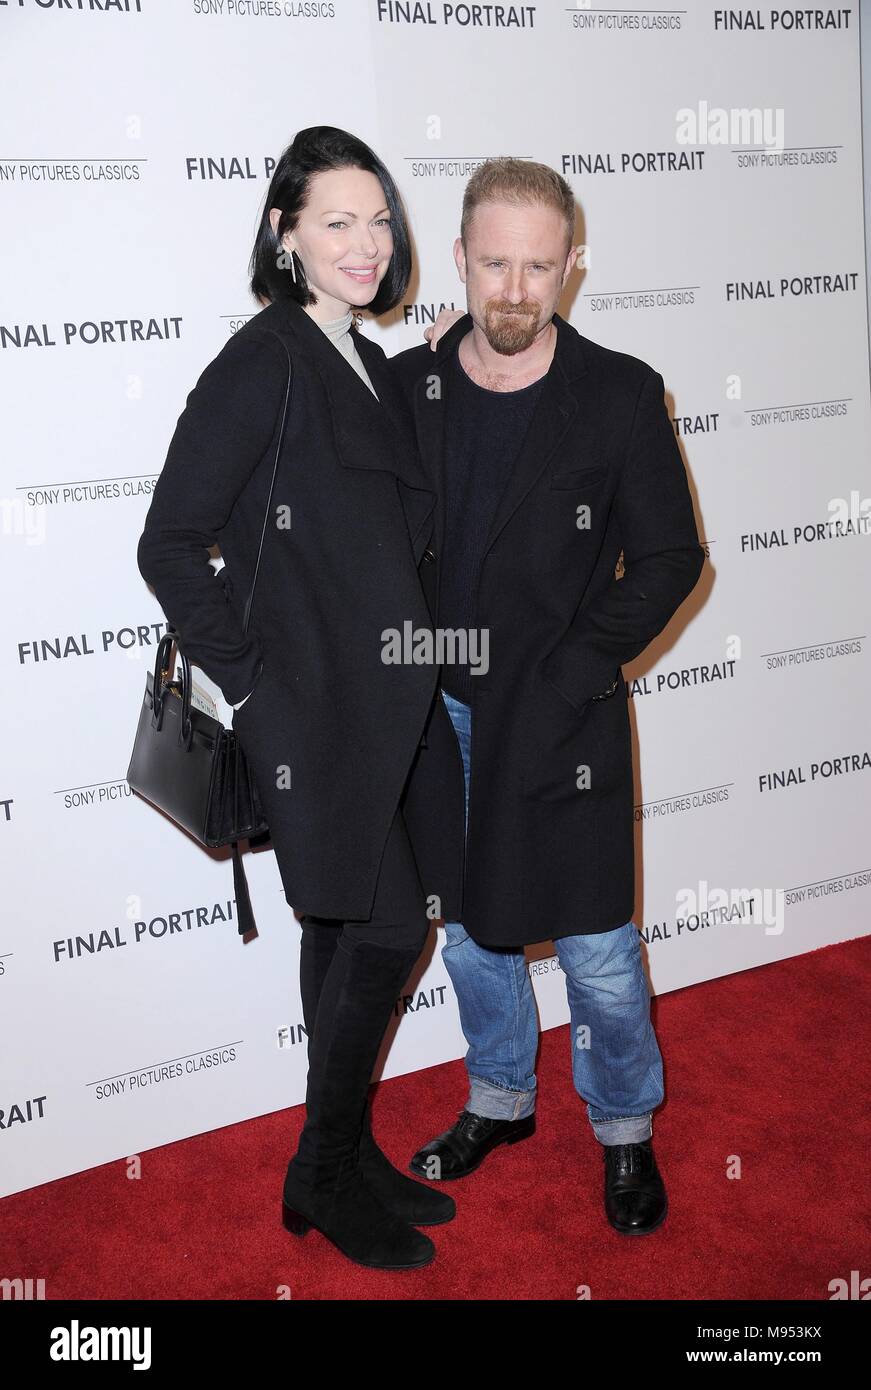 New York, NY, USA. 22nd Mar, 2018. Laura Prepon, Ben Foster at arrivals for Sony Pictures Classics' FINAL PORTRAIT Premiere, Solomon R. Guggenheim Museum, New York, NY March 22, 2018. Credit: Kristin Callahan/Everett Collection/Alamy Live News Stock Photo